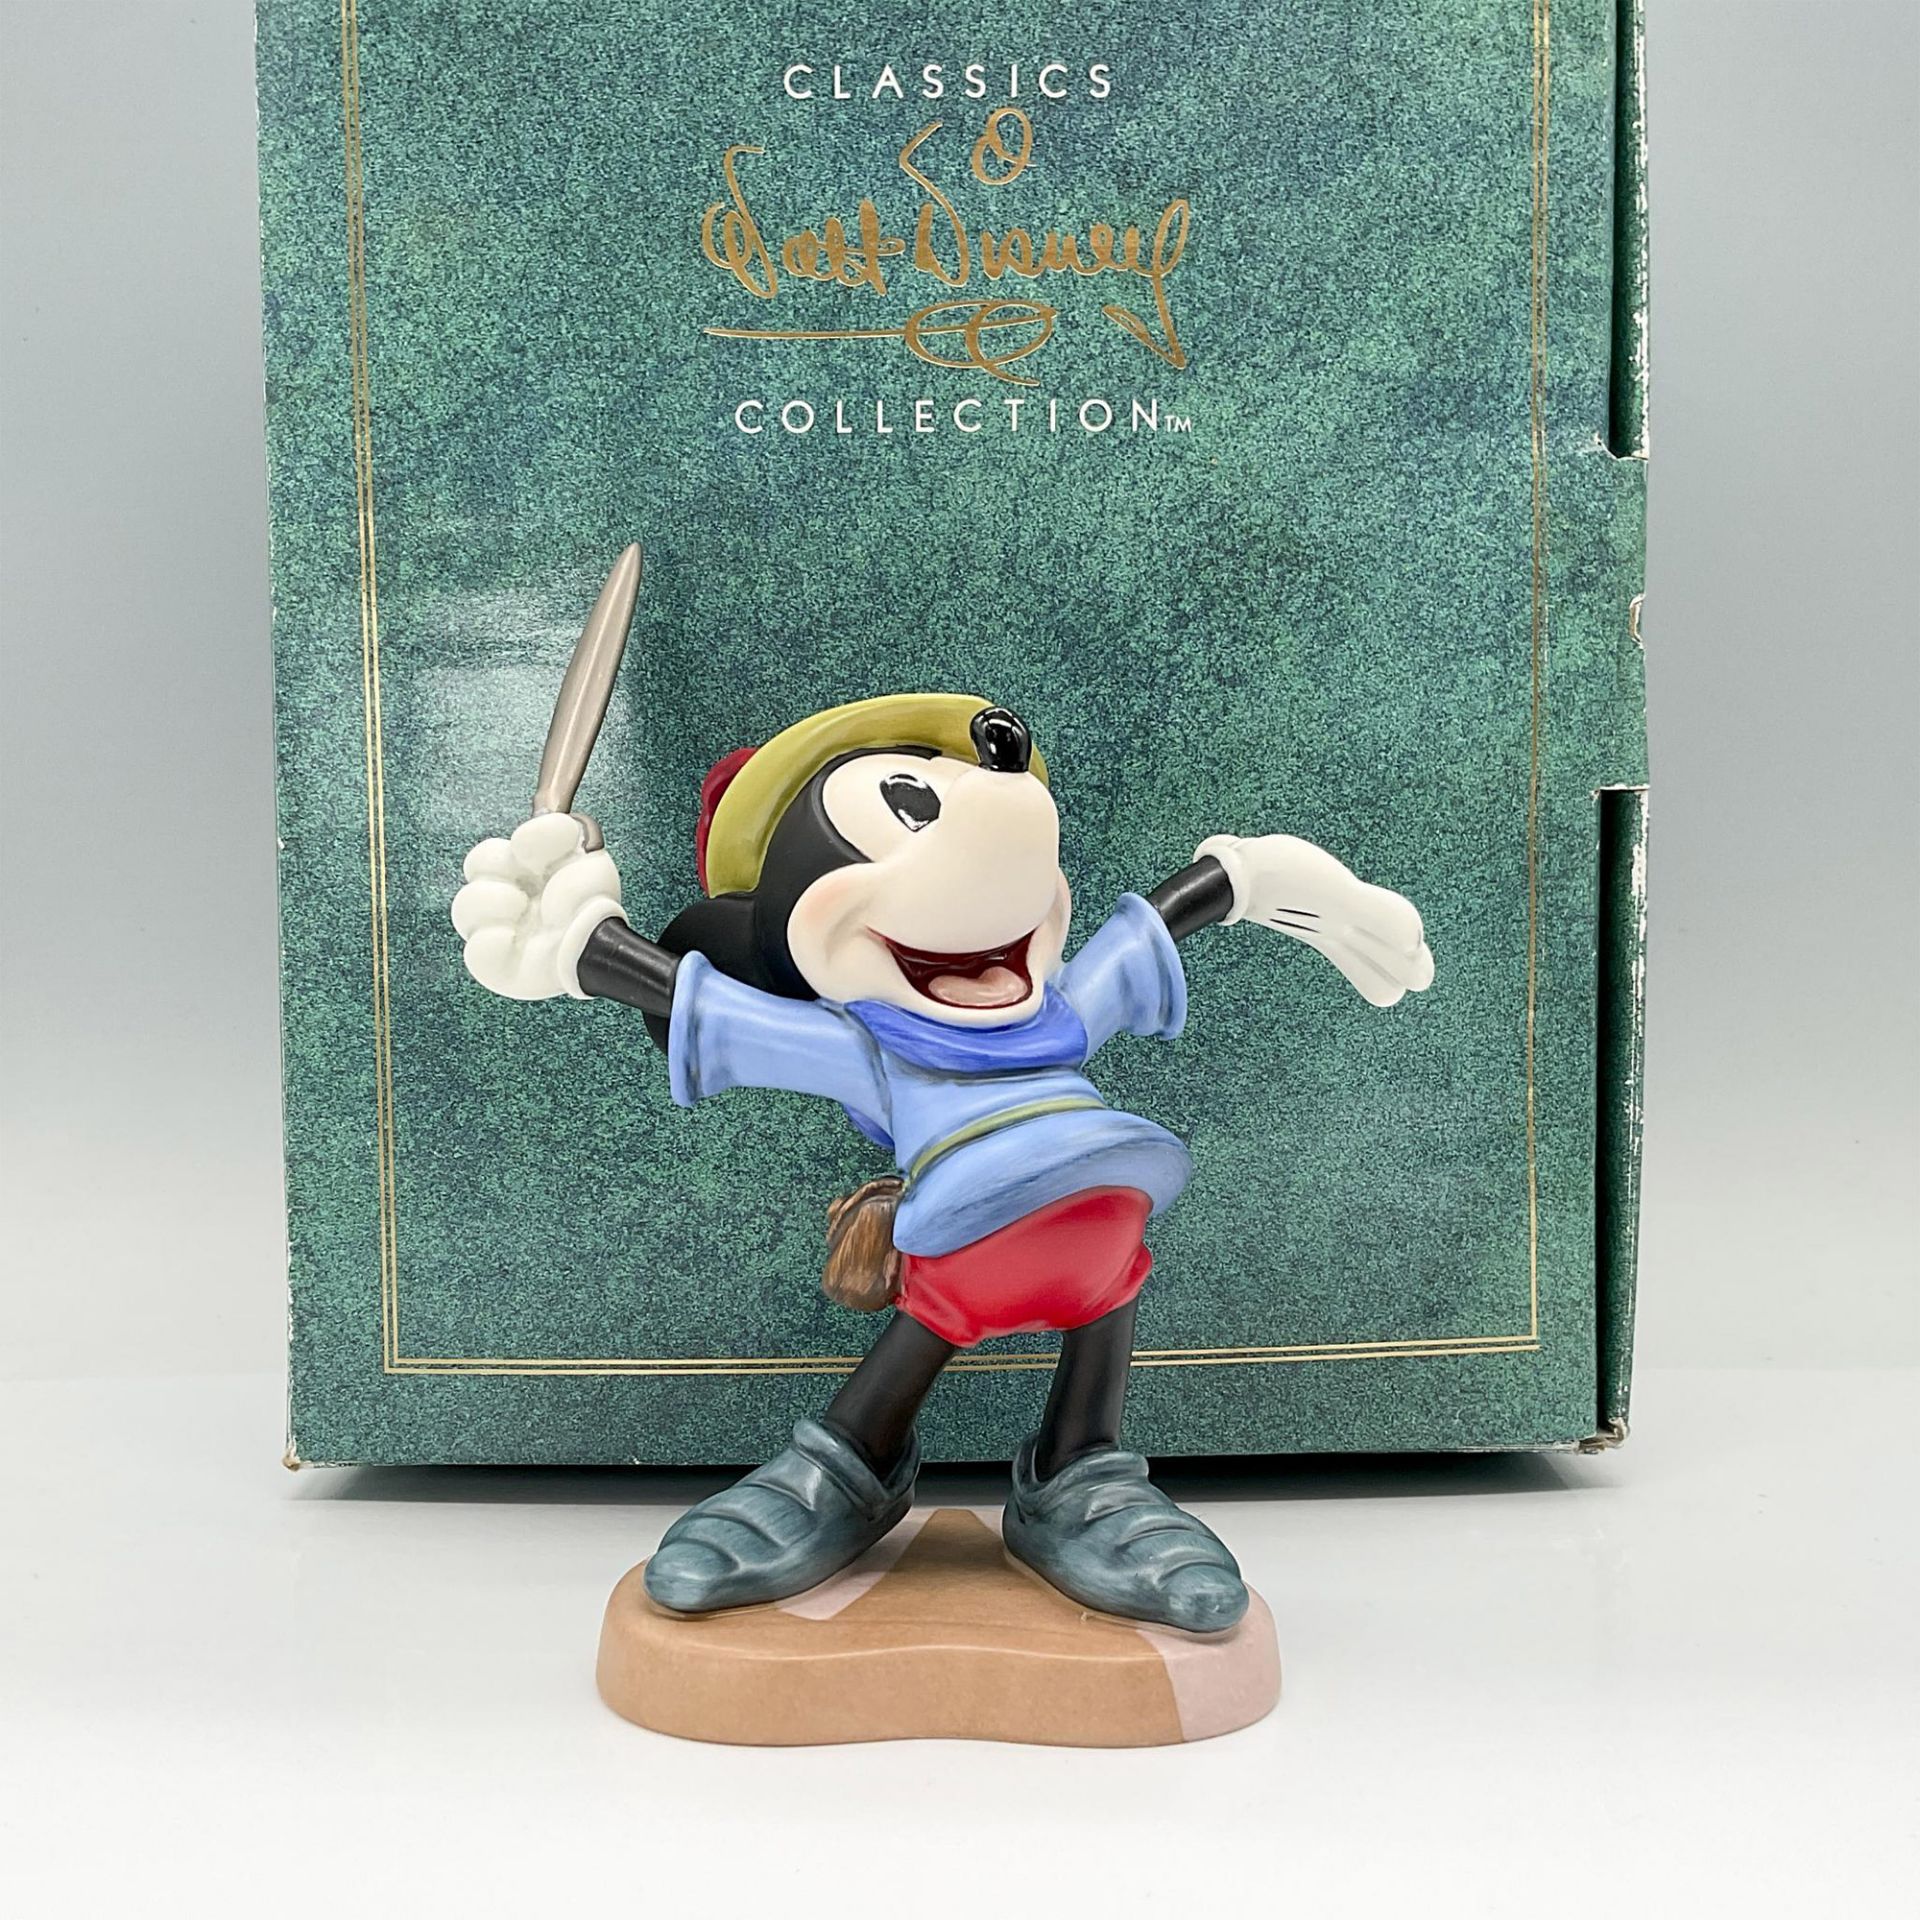 Disney Classic Collection Figurine Mickey Mouse - Image 4 of 4